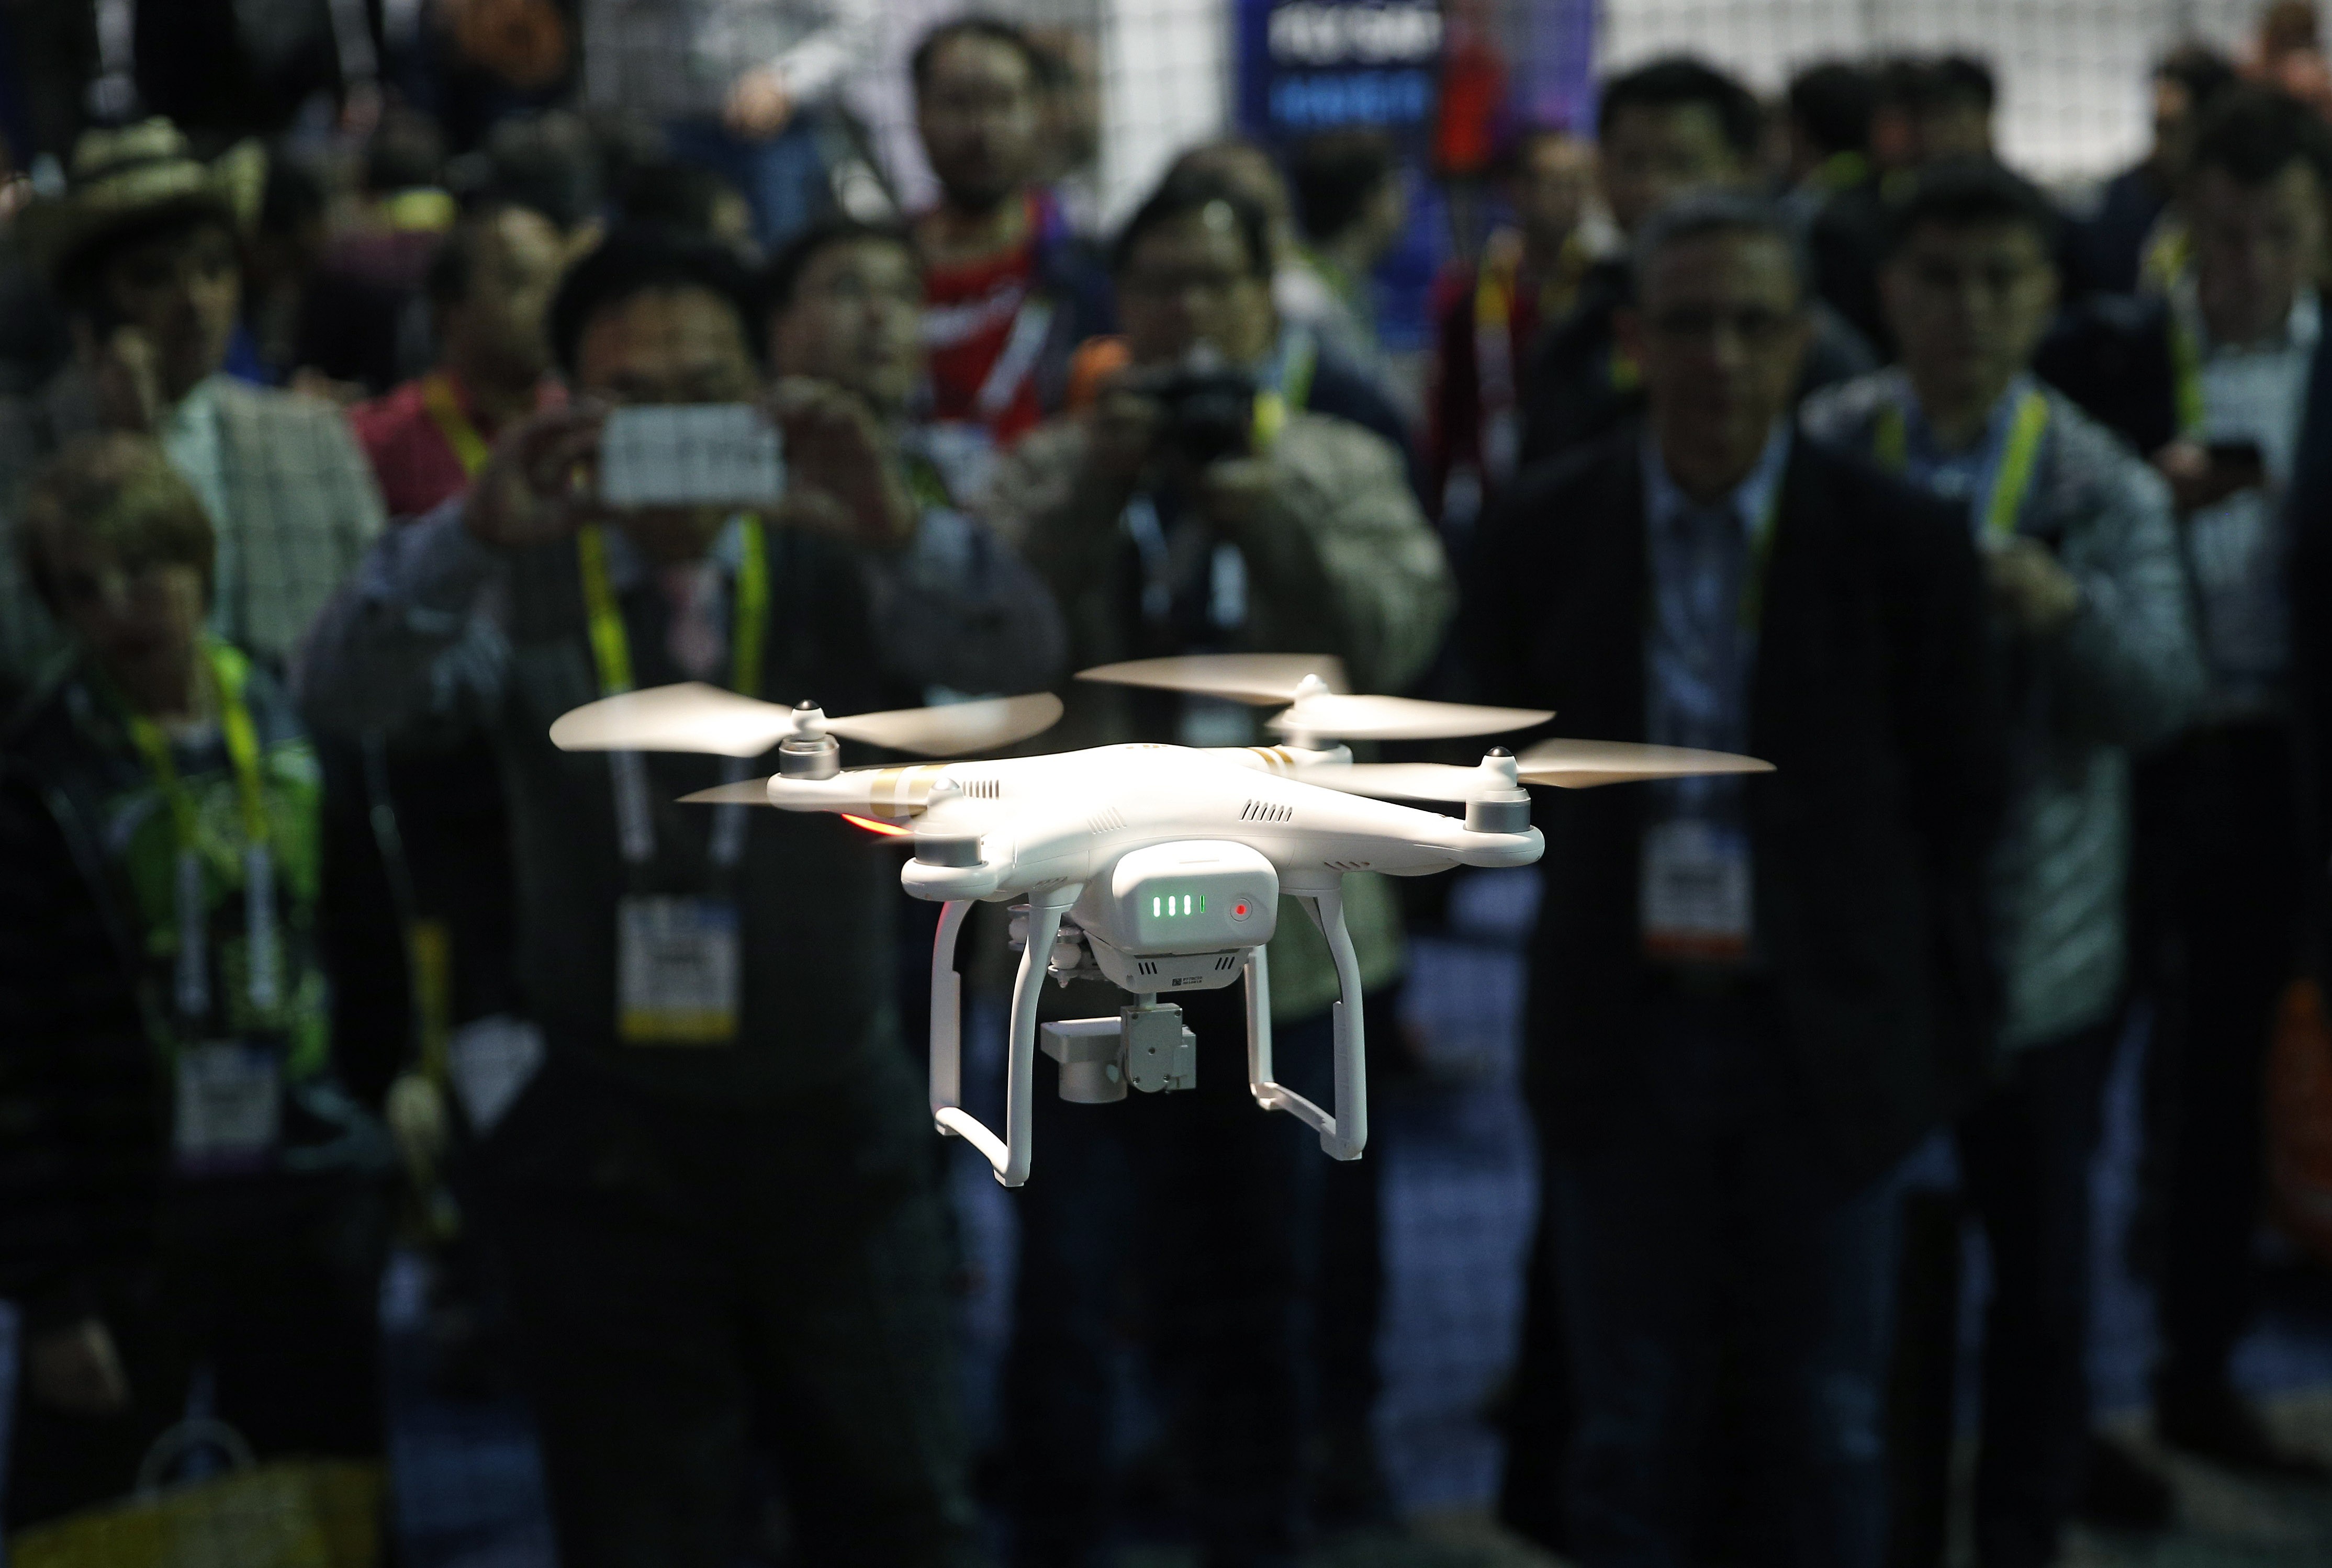 Putian police are monitoring motorists using drones made by Shenzhen-based DJI. Photo: AP